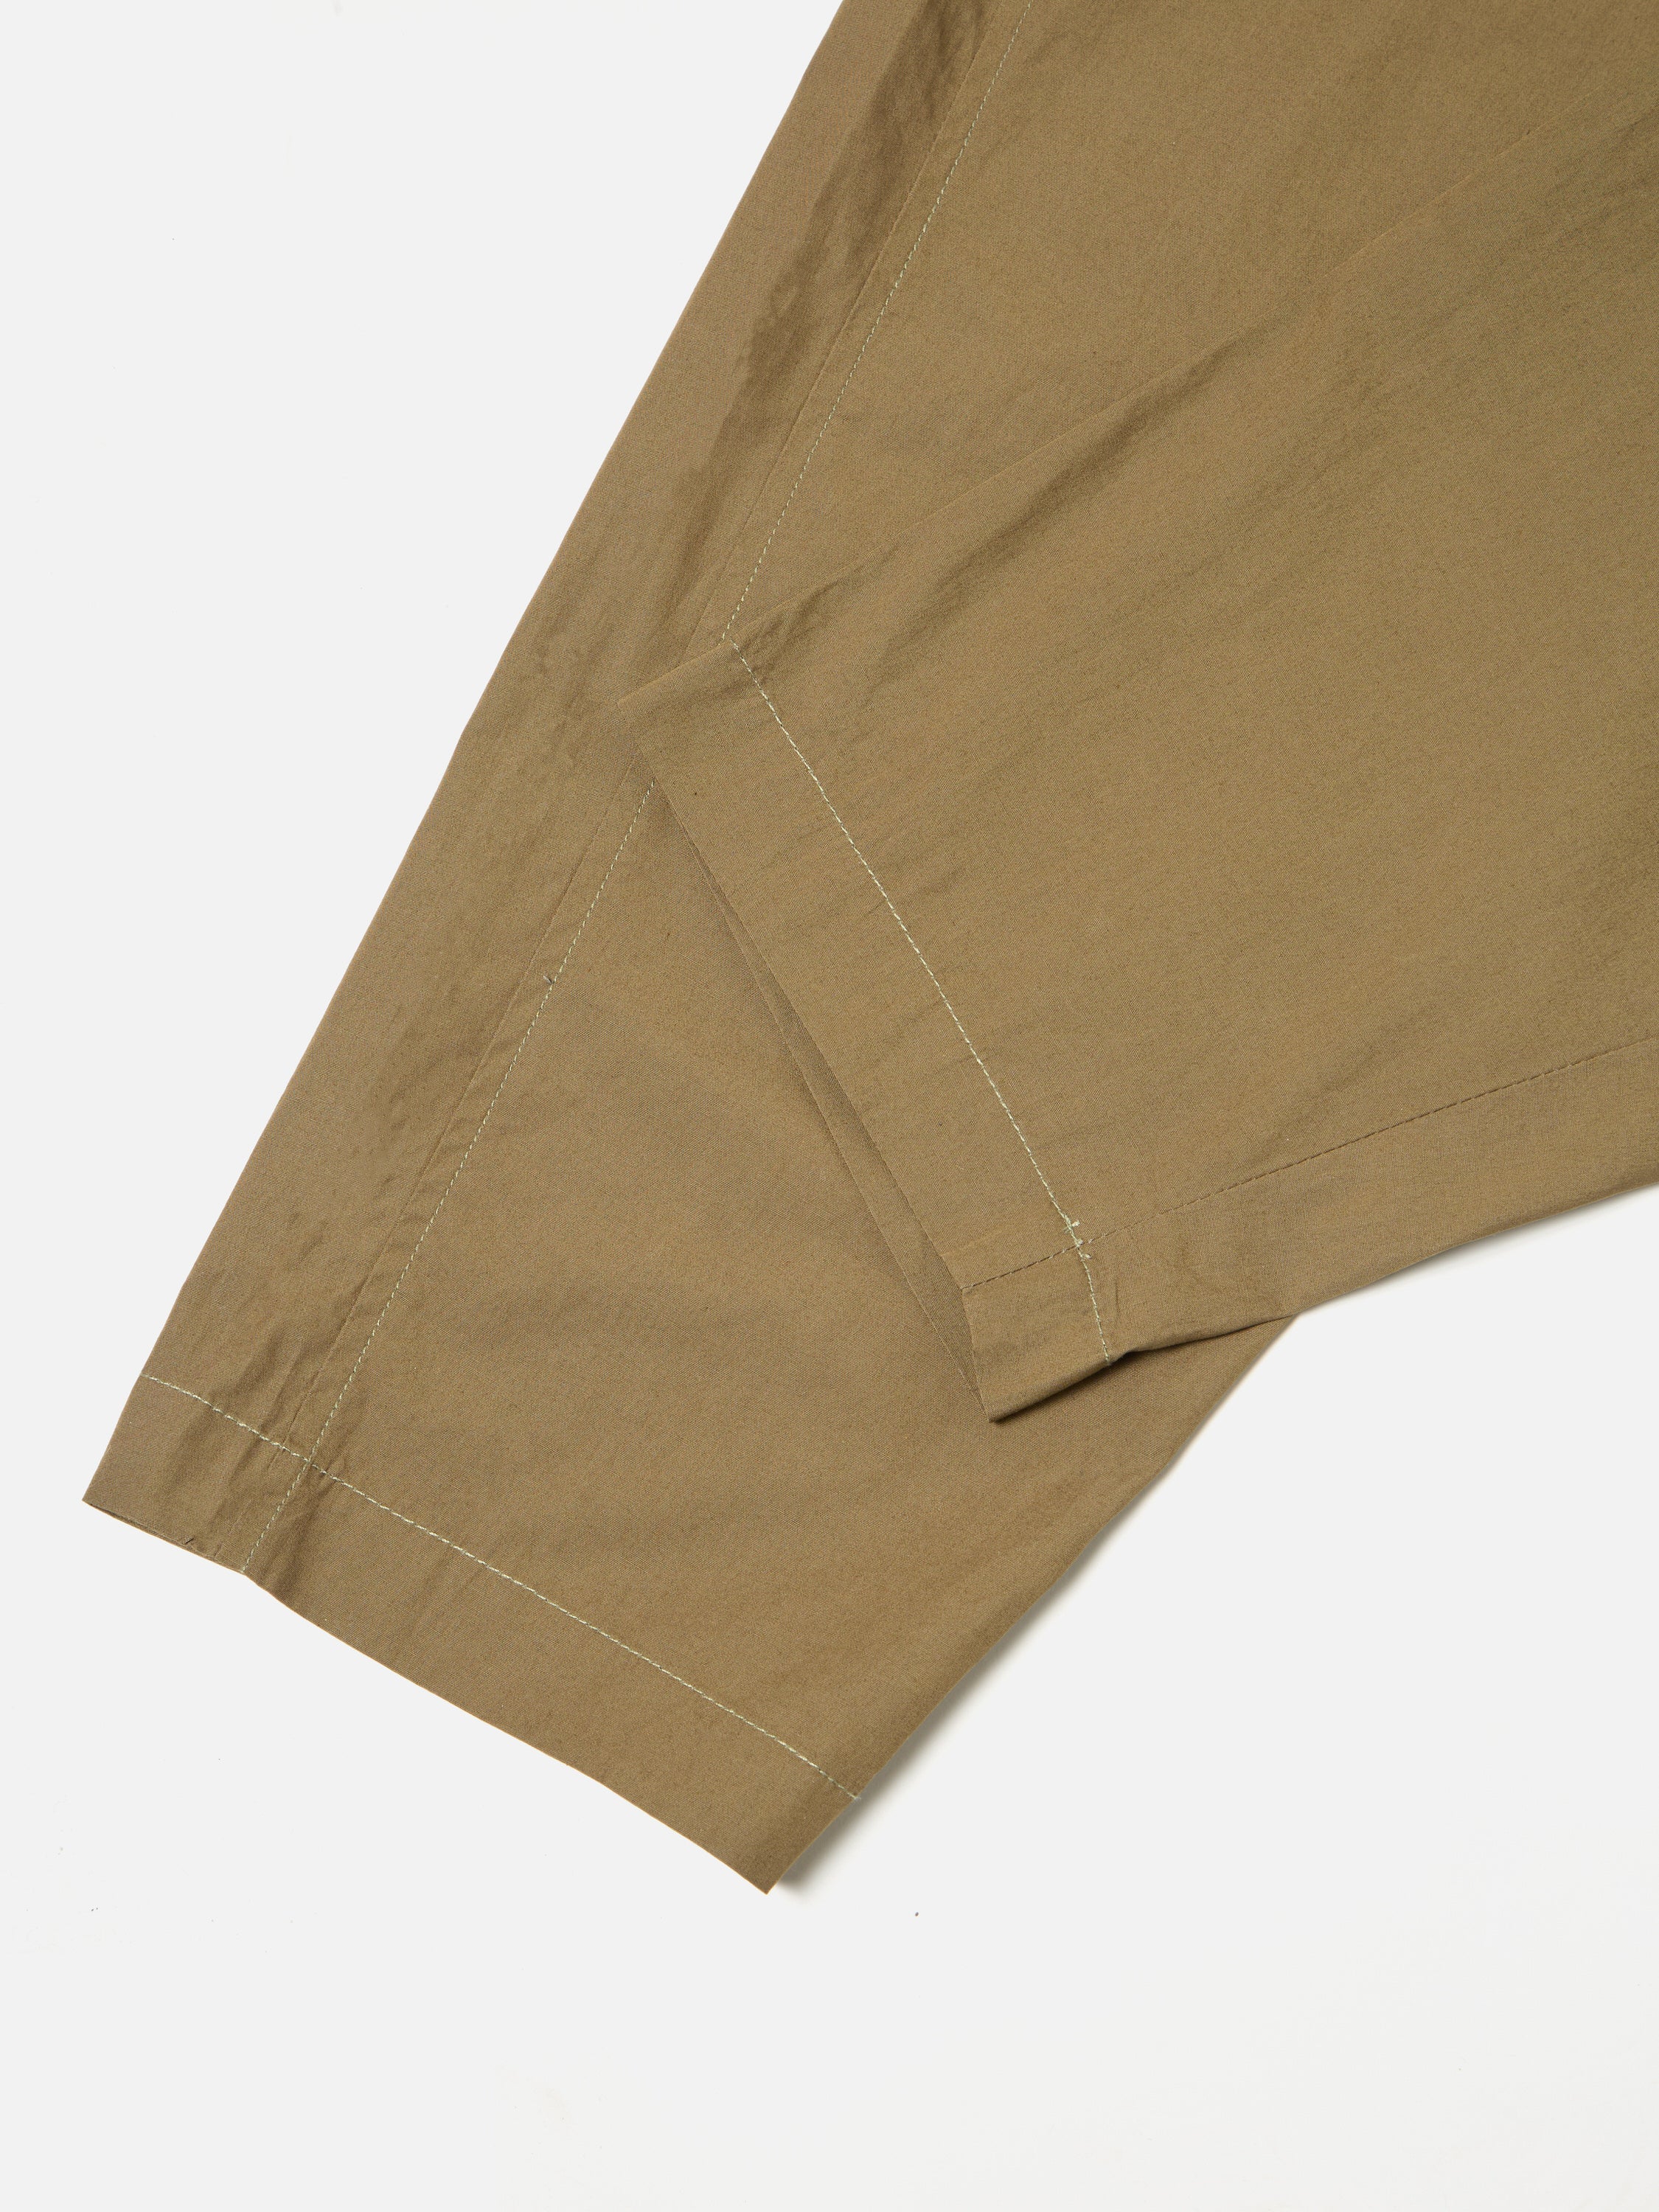 Universal Works Pleated Track Pant in Khaki Broad Cloth